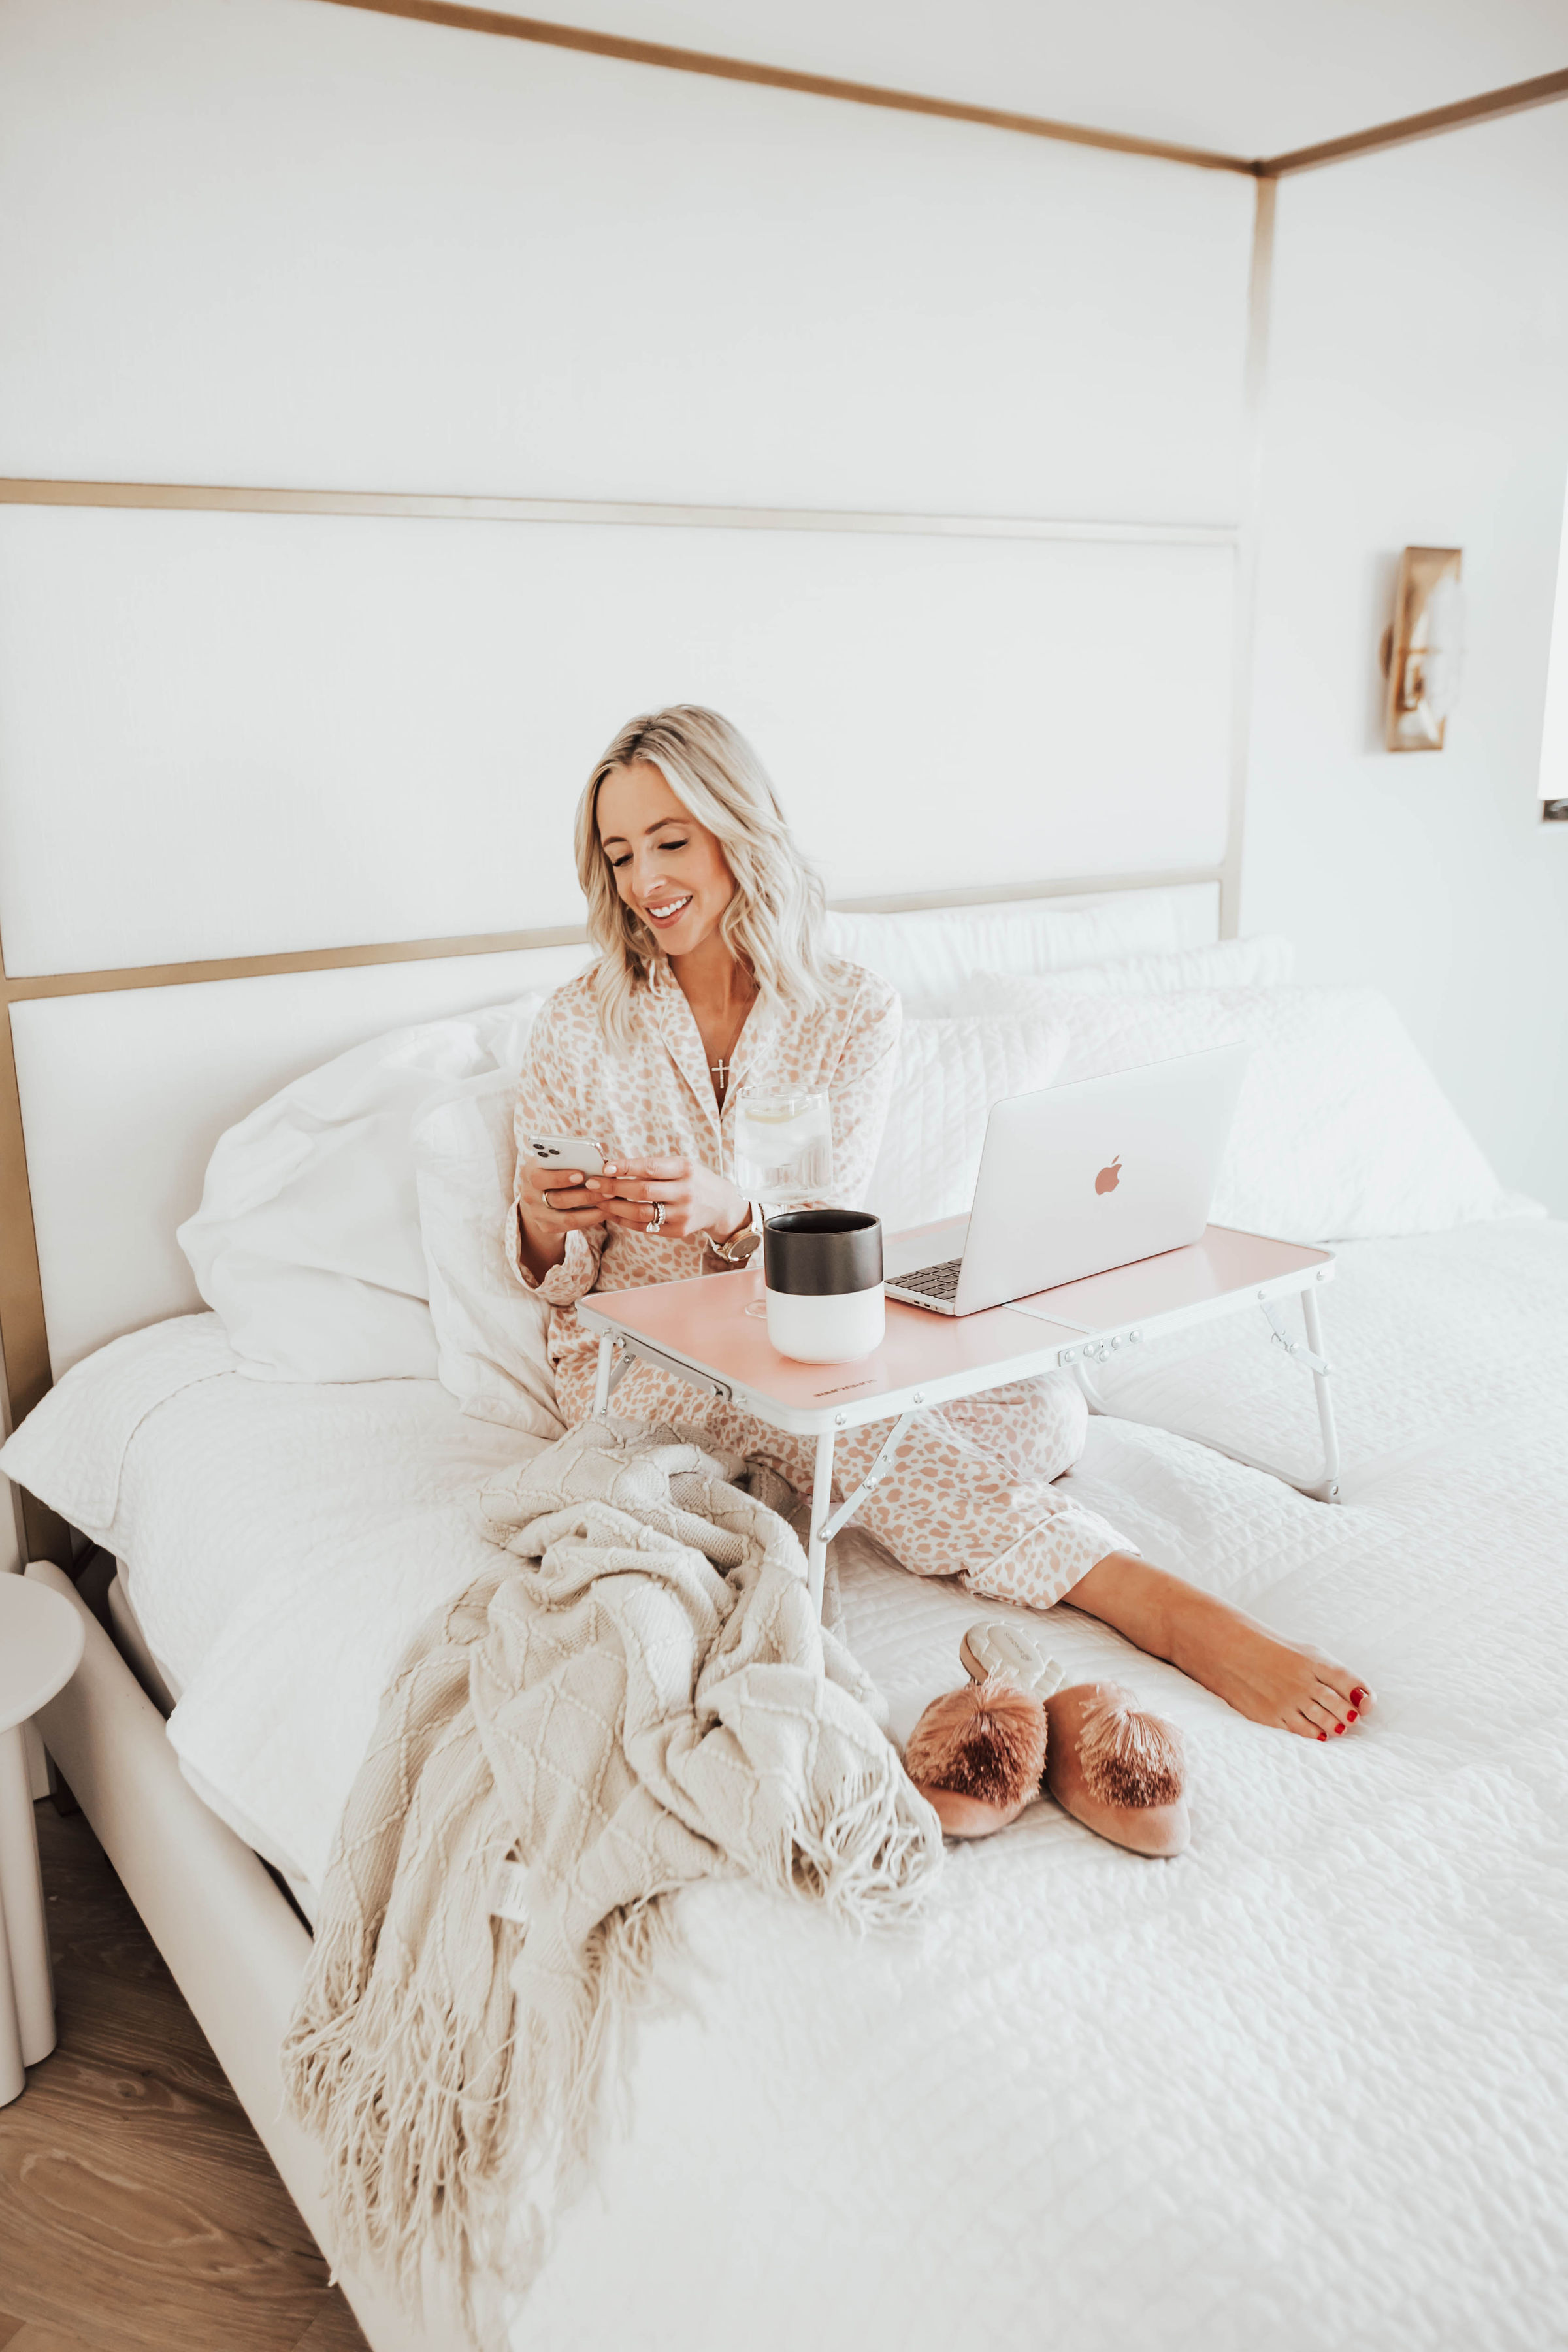 Emily Farren Wieczorek of the fashion and lifestyle blog Two Peas in a Prada shares her favorite laptop stand, eye massager and more in her January Amazon Favorites.